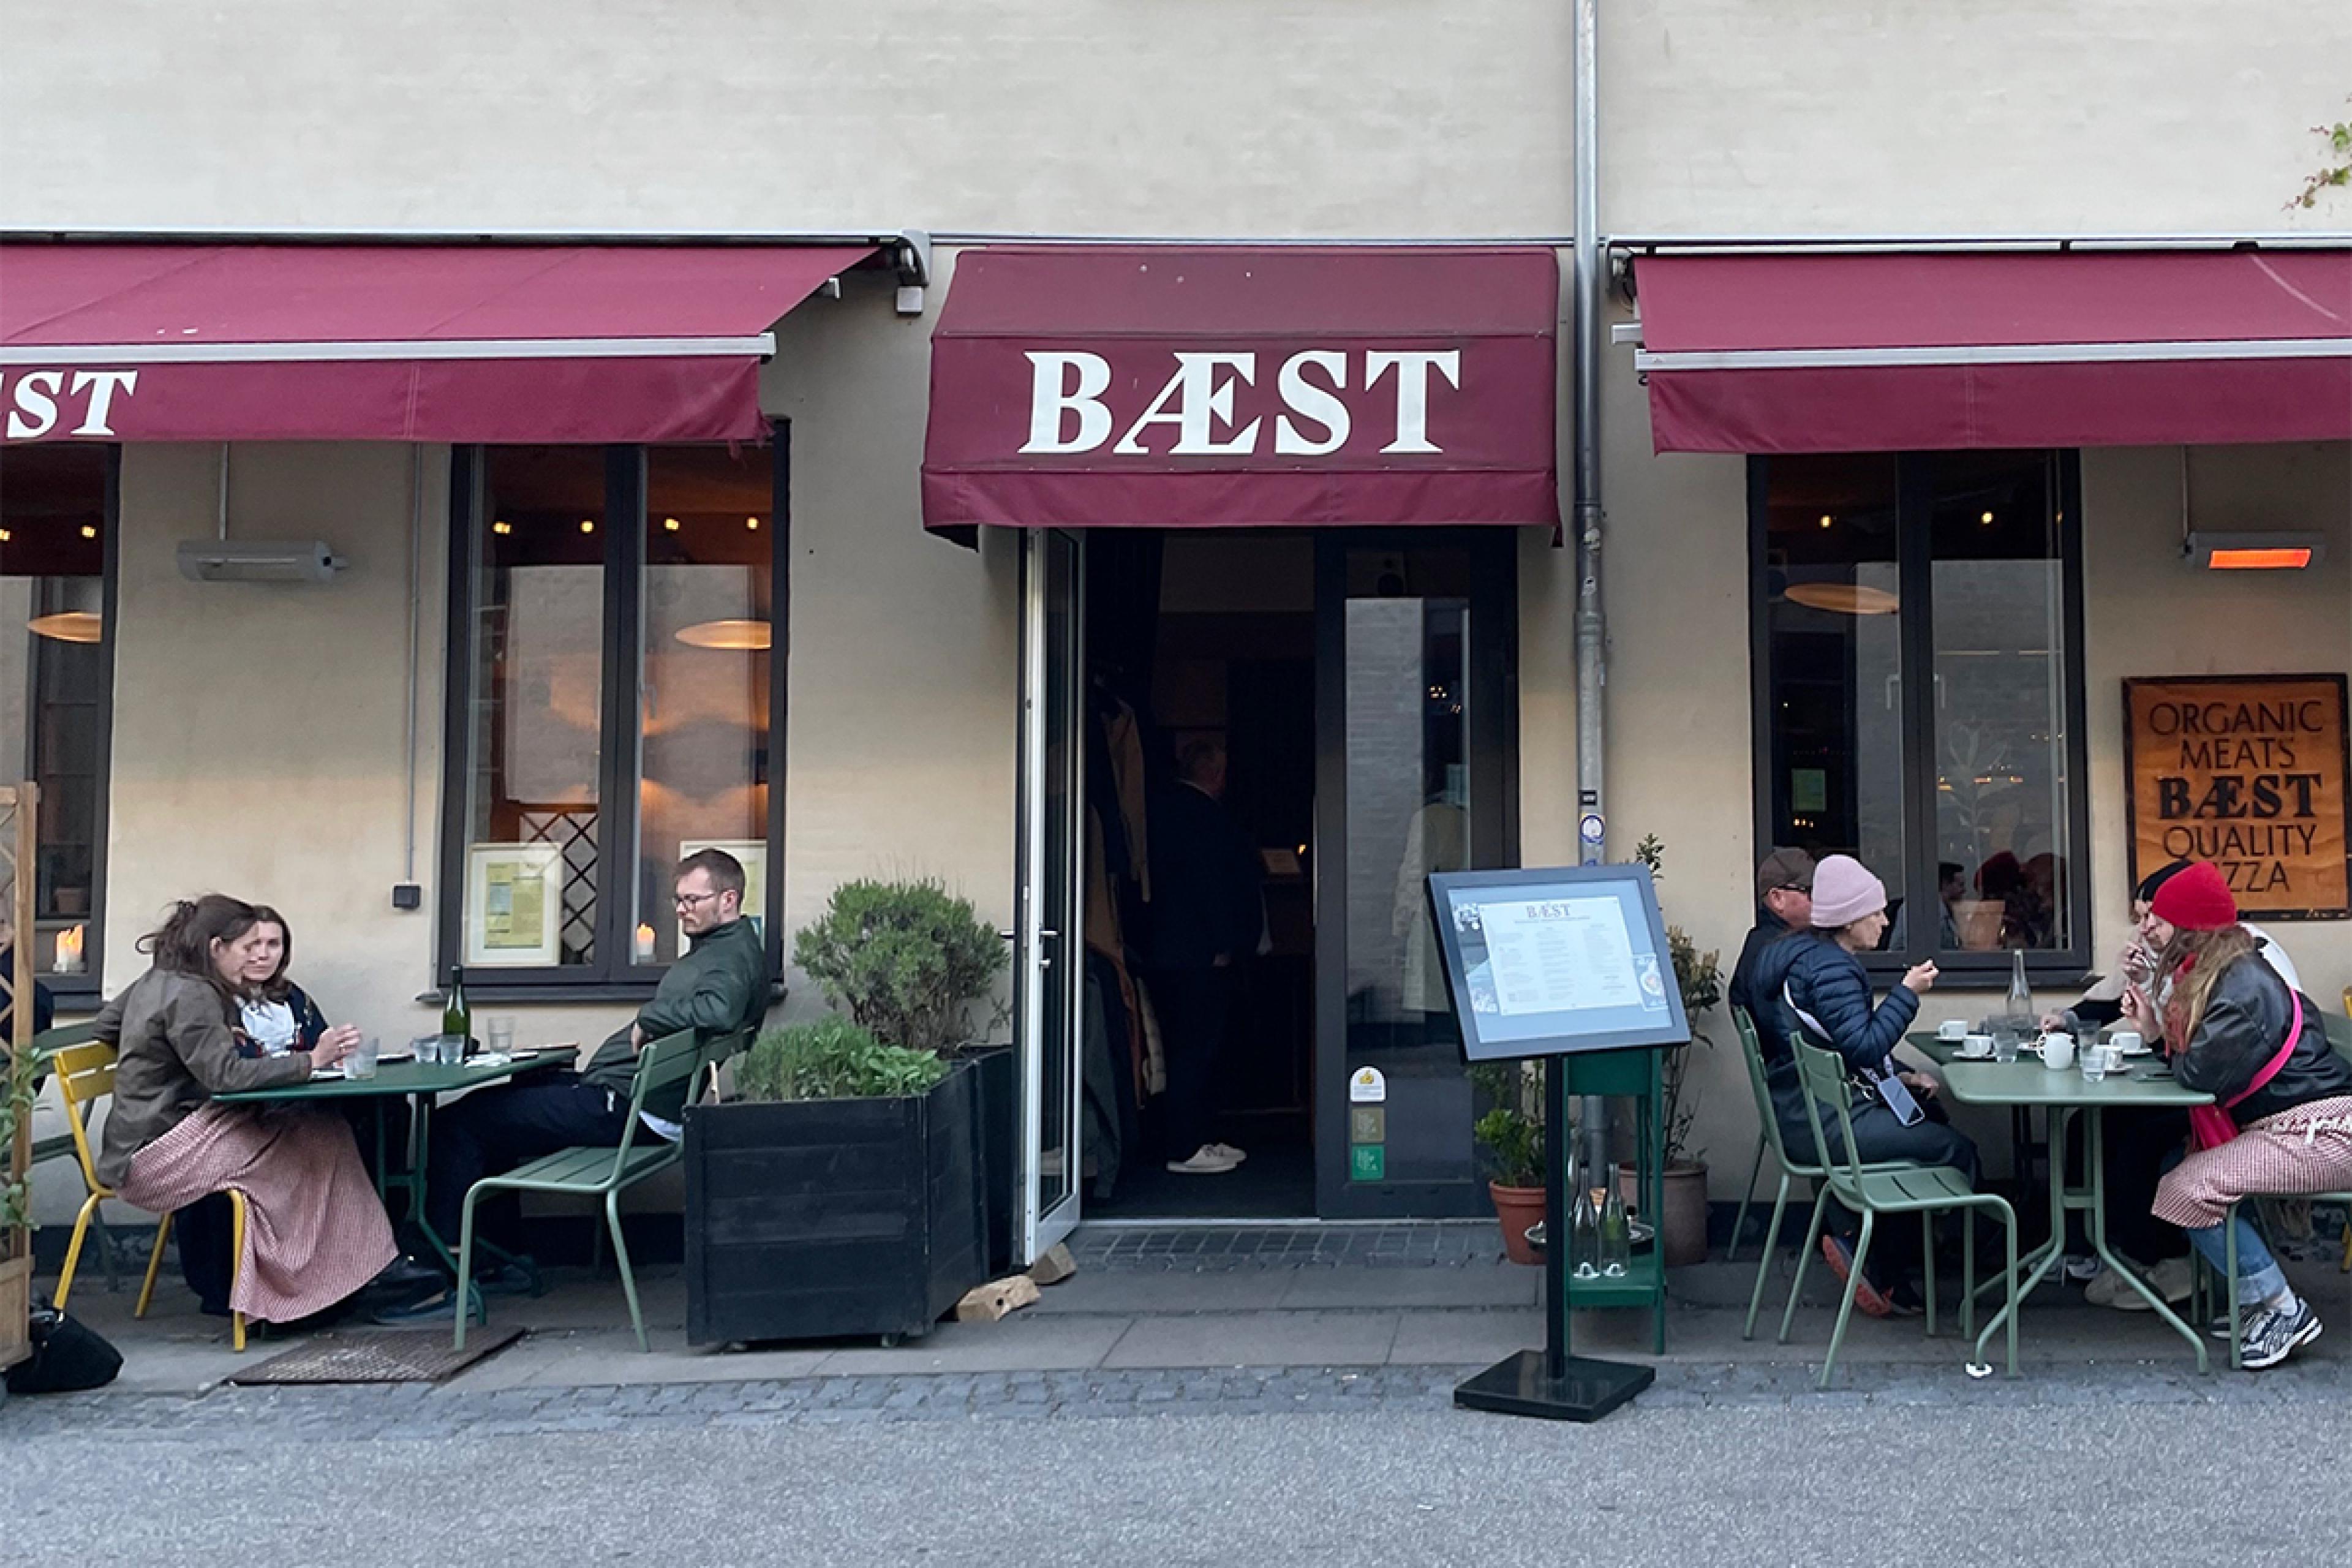 exterior of restaurant in copenhagen with stucco walls and sign saying Baest above open door. People wearing clothing for a cold fall day are sitting at tables outside.